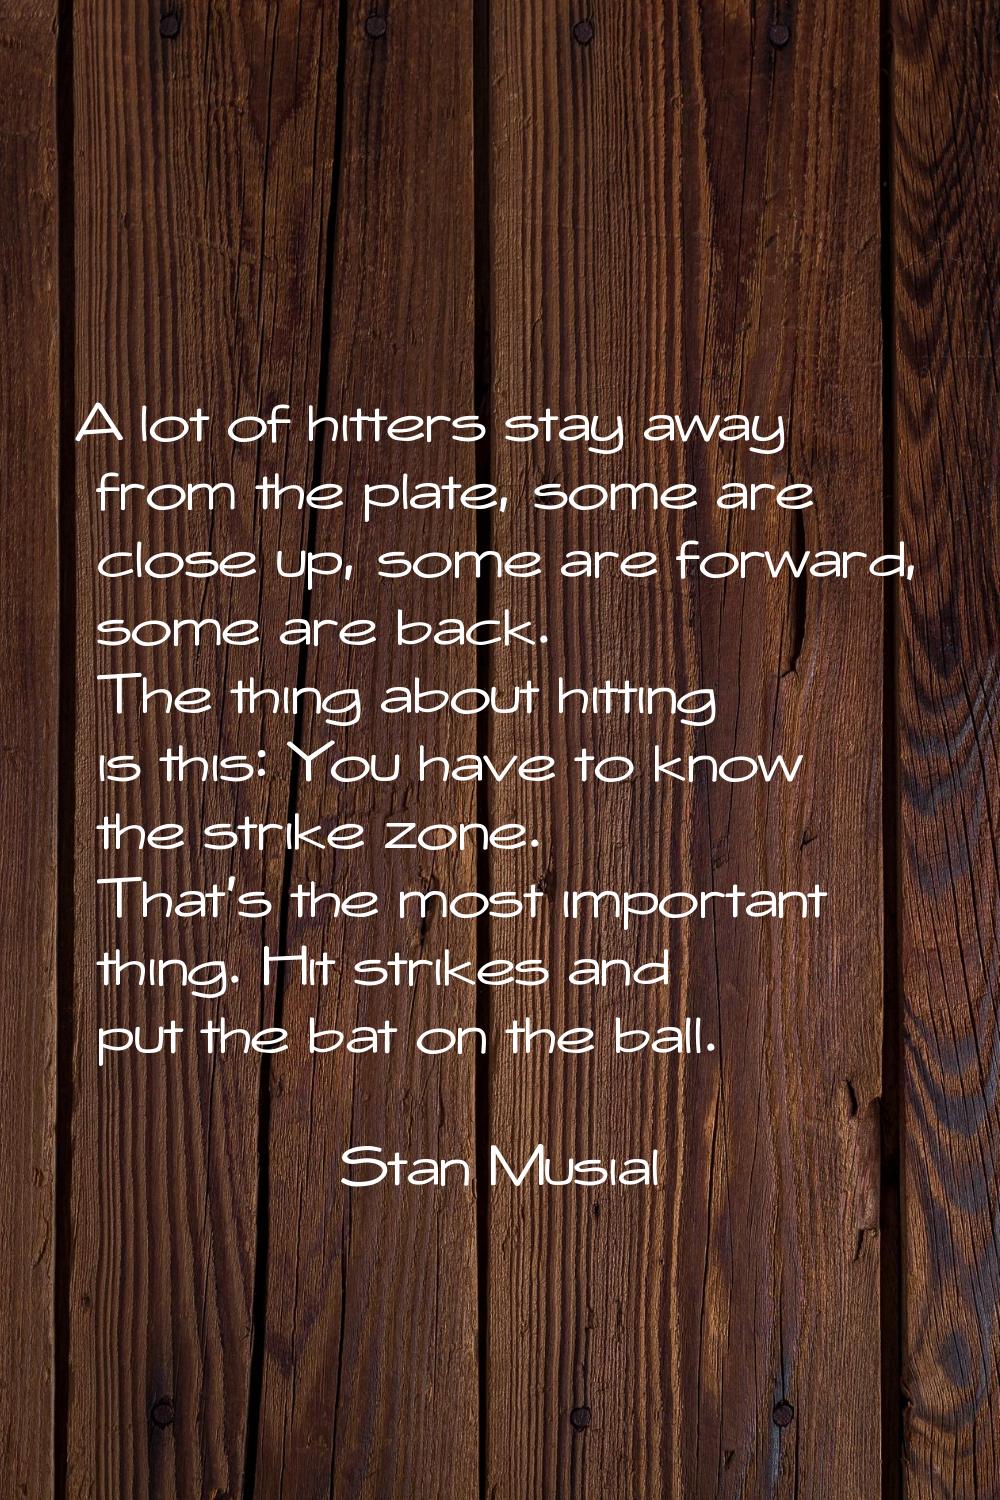 A lot of hitters stay away from the plate, some are close up, some are forward, some are back. The 